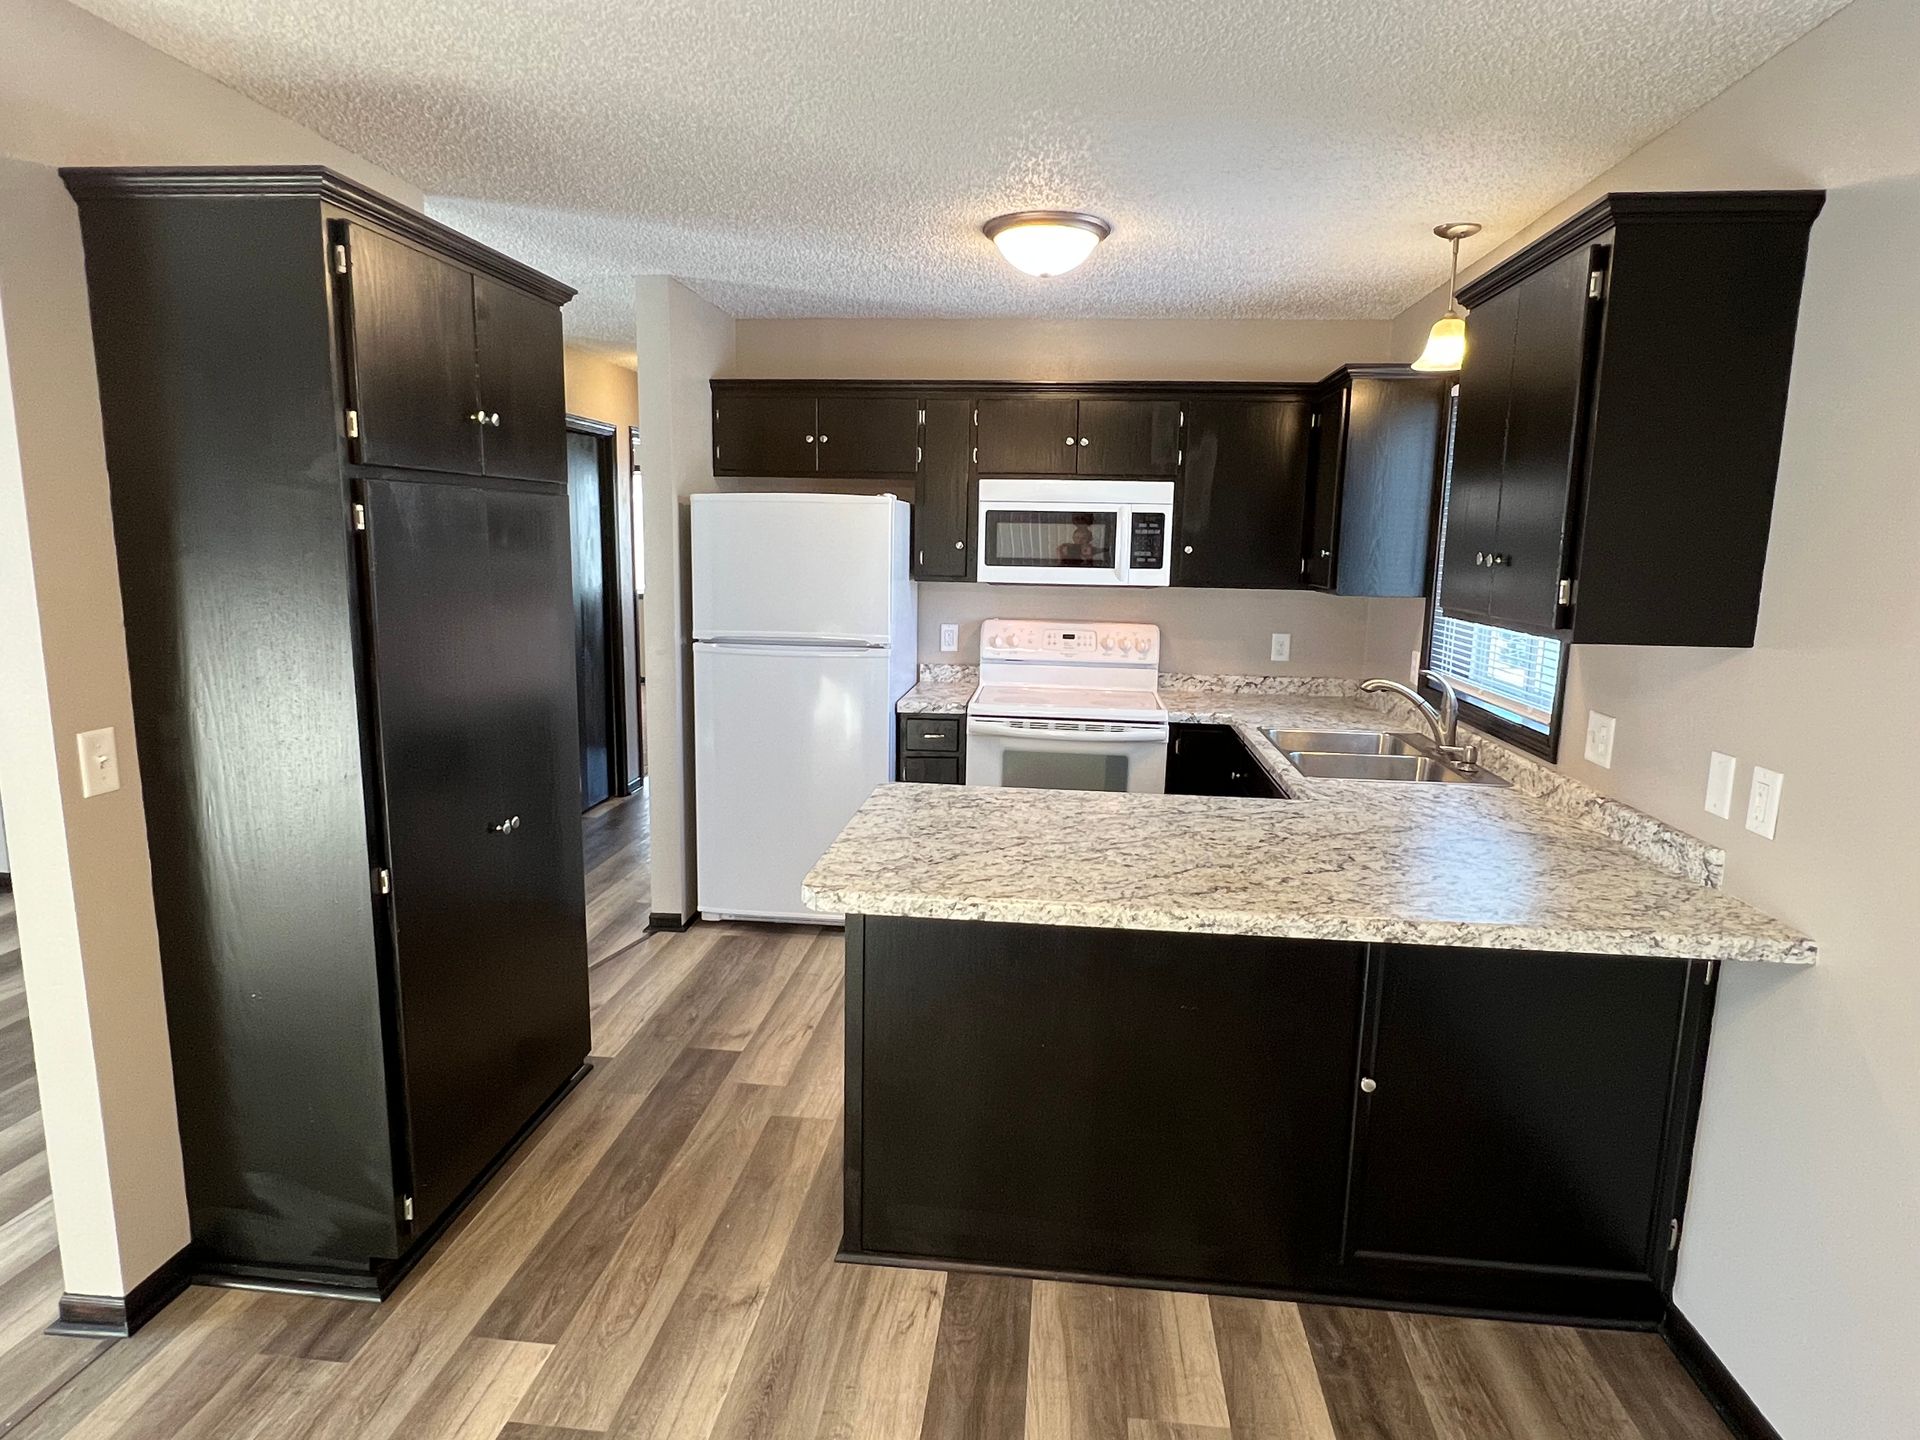 A kitchen with black cabinets and a white refrigerator